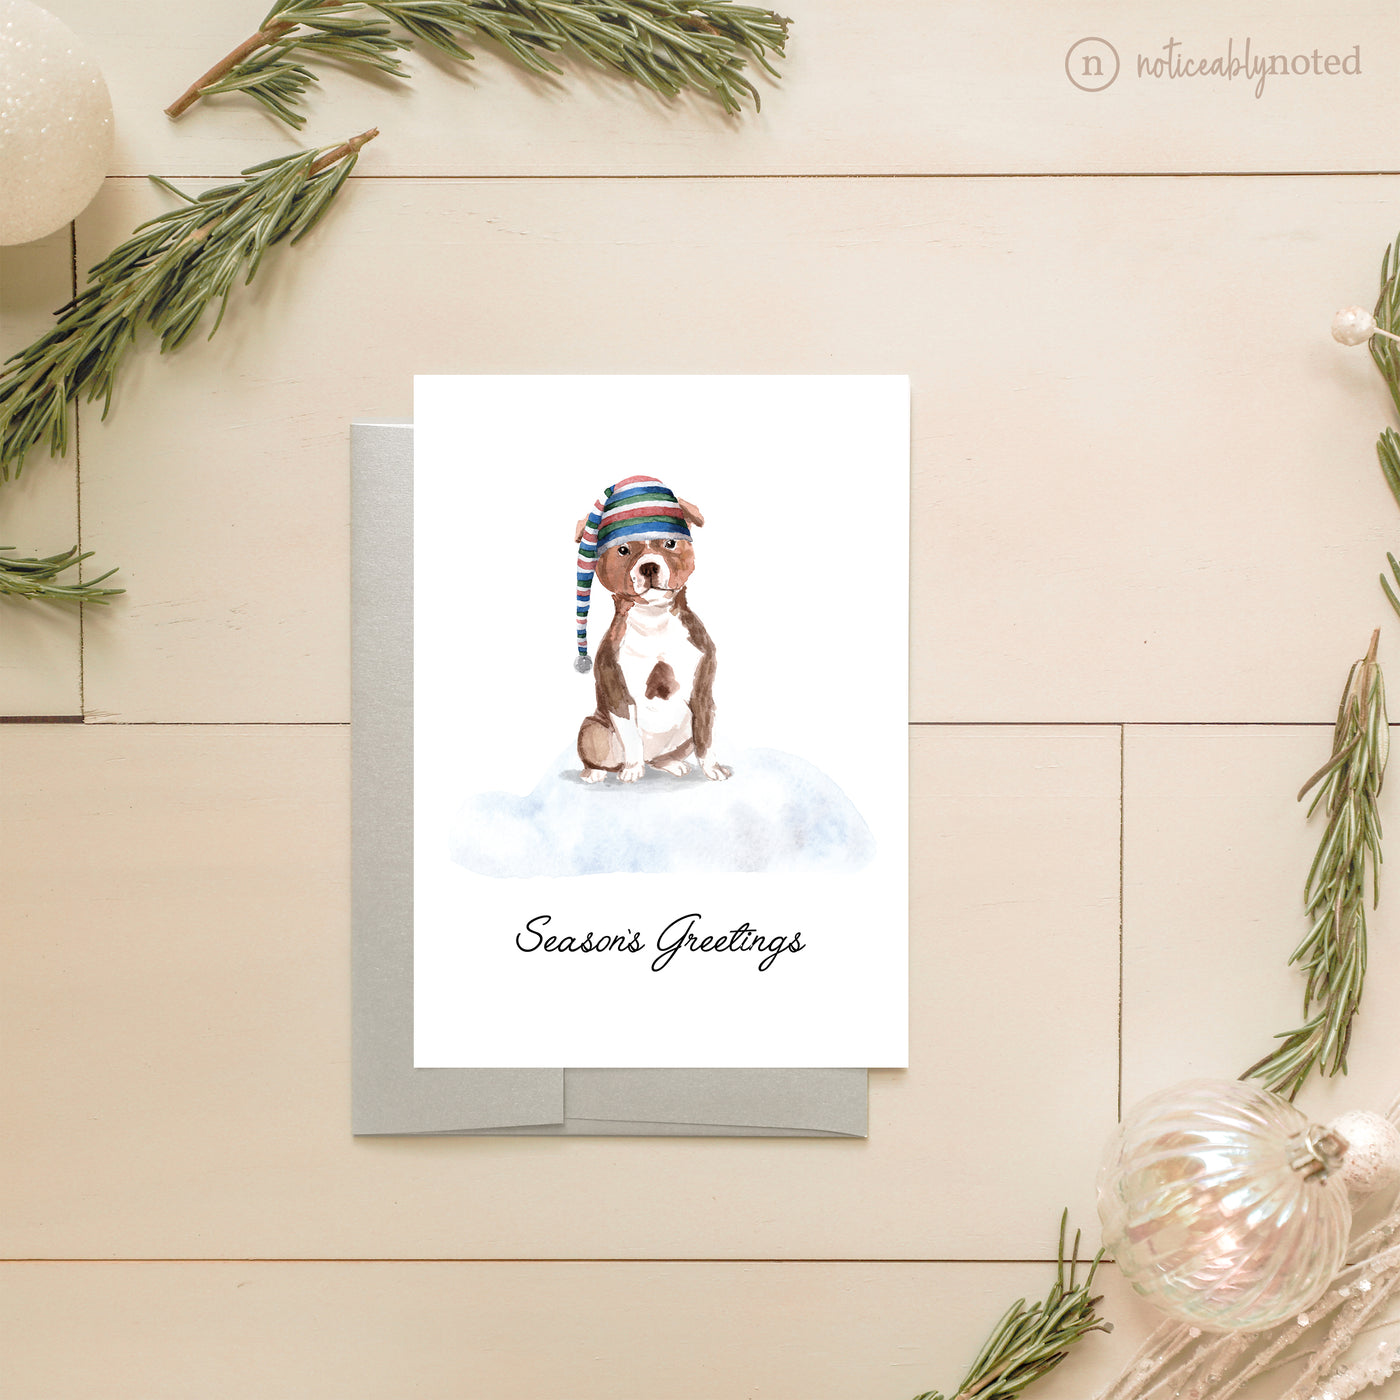 Staffordshire Bull Terrier Holiday Card | Noticeably Noted